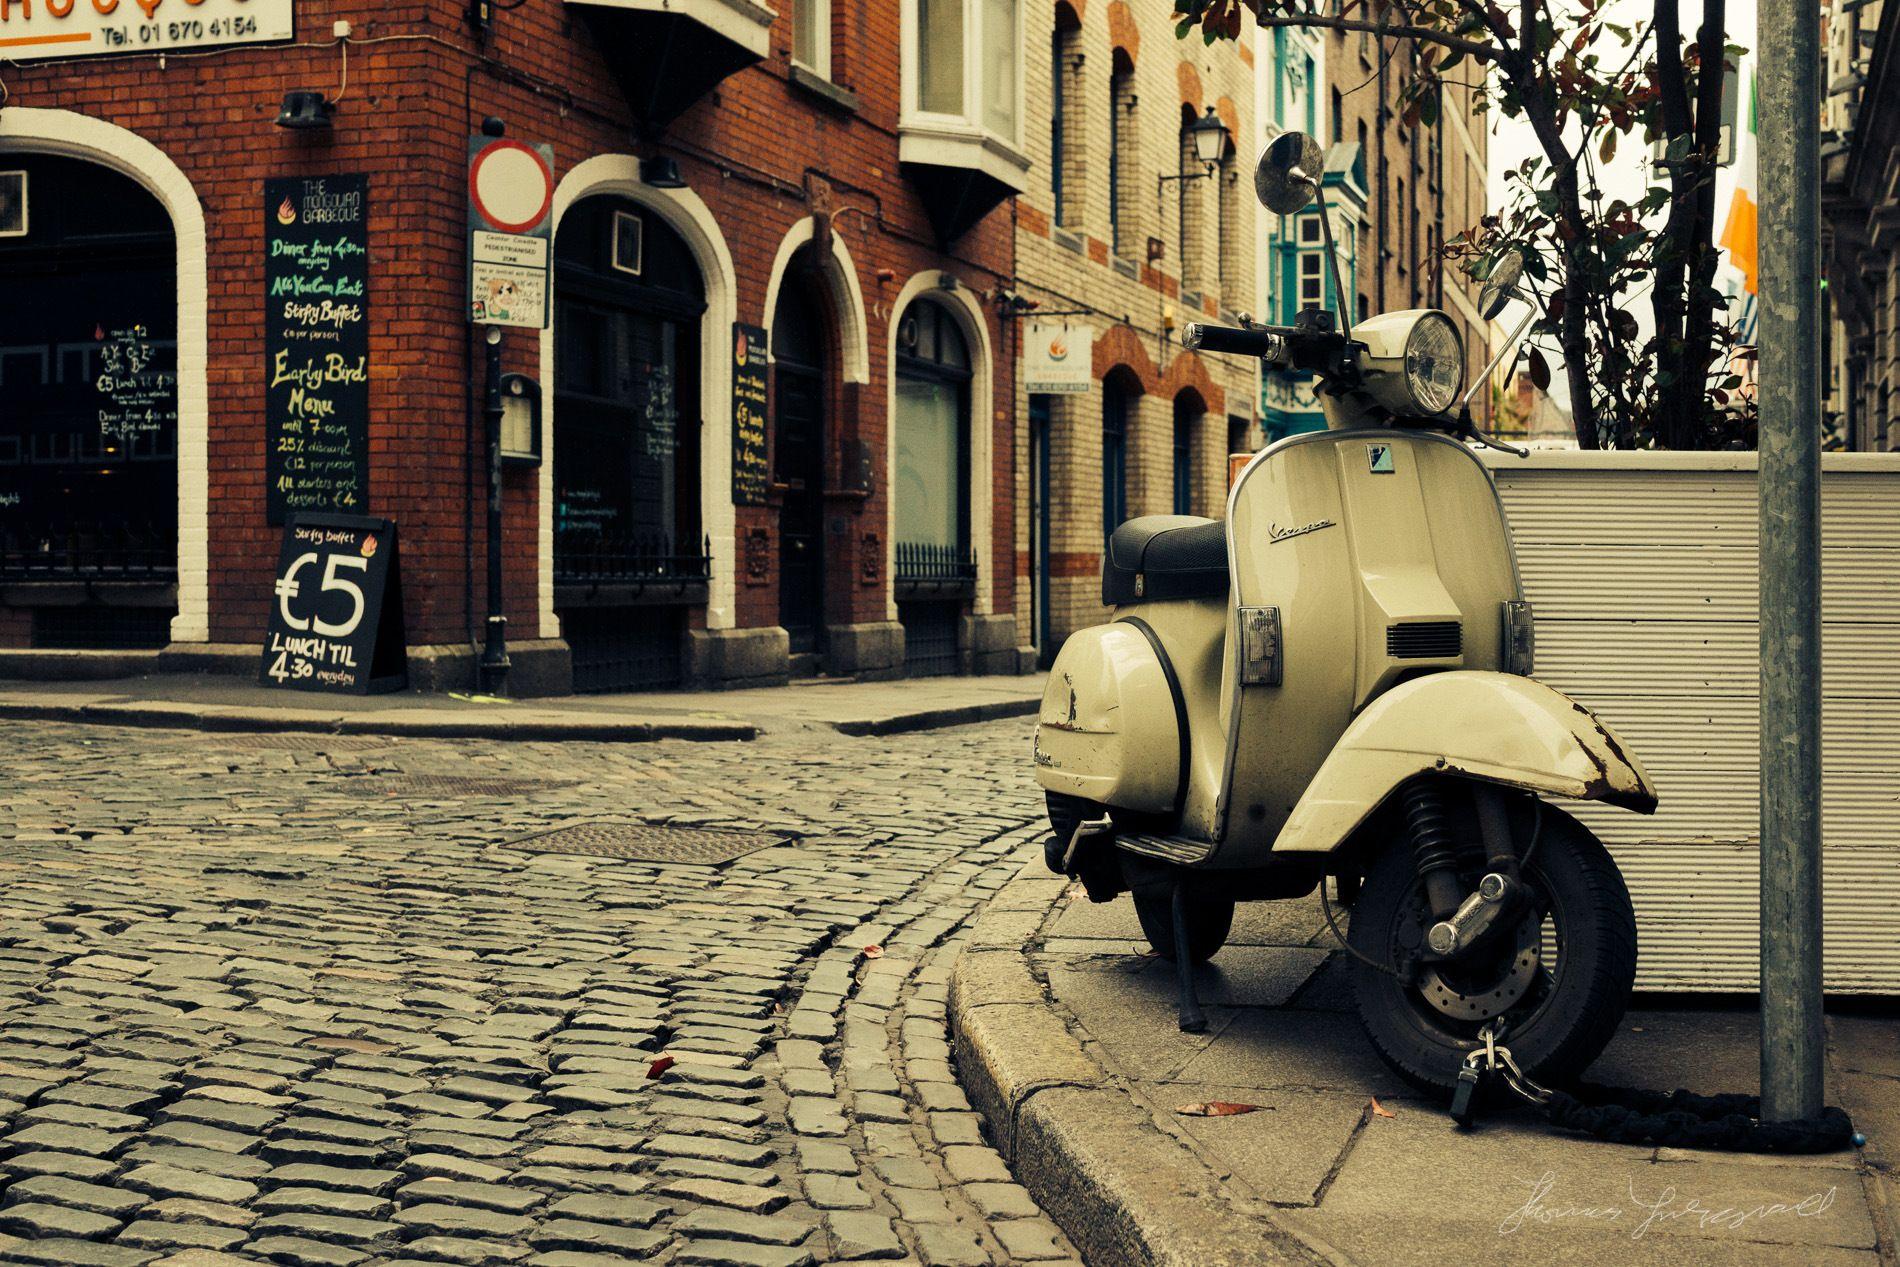 OW:651 Wallpaper, Full HD Awesome Vespa Wallpaper Collection